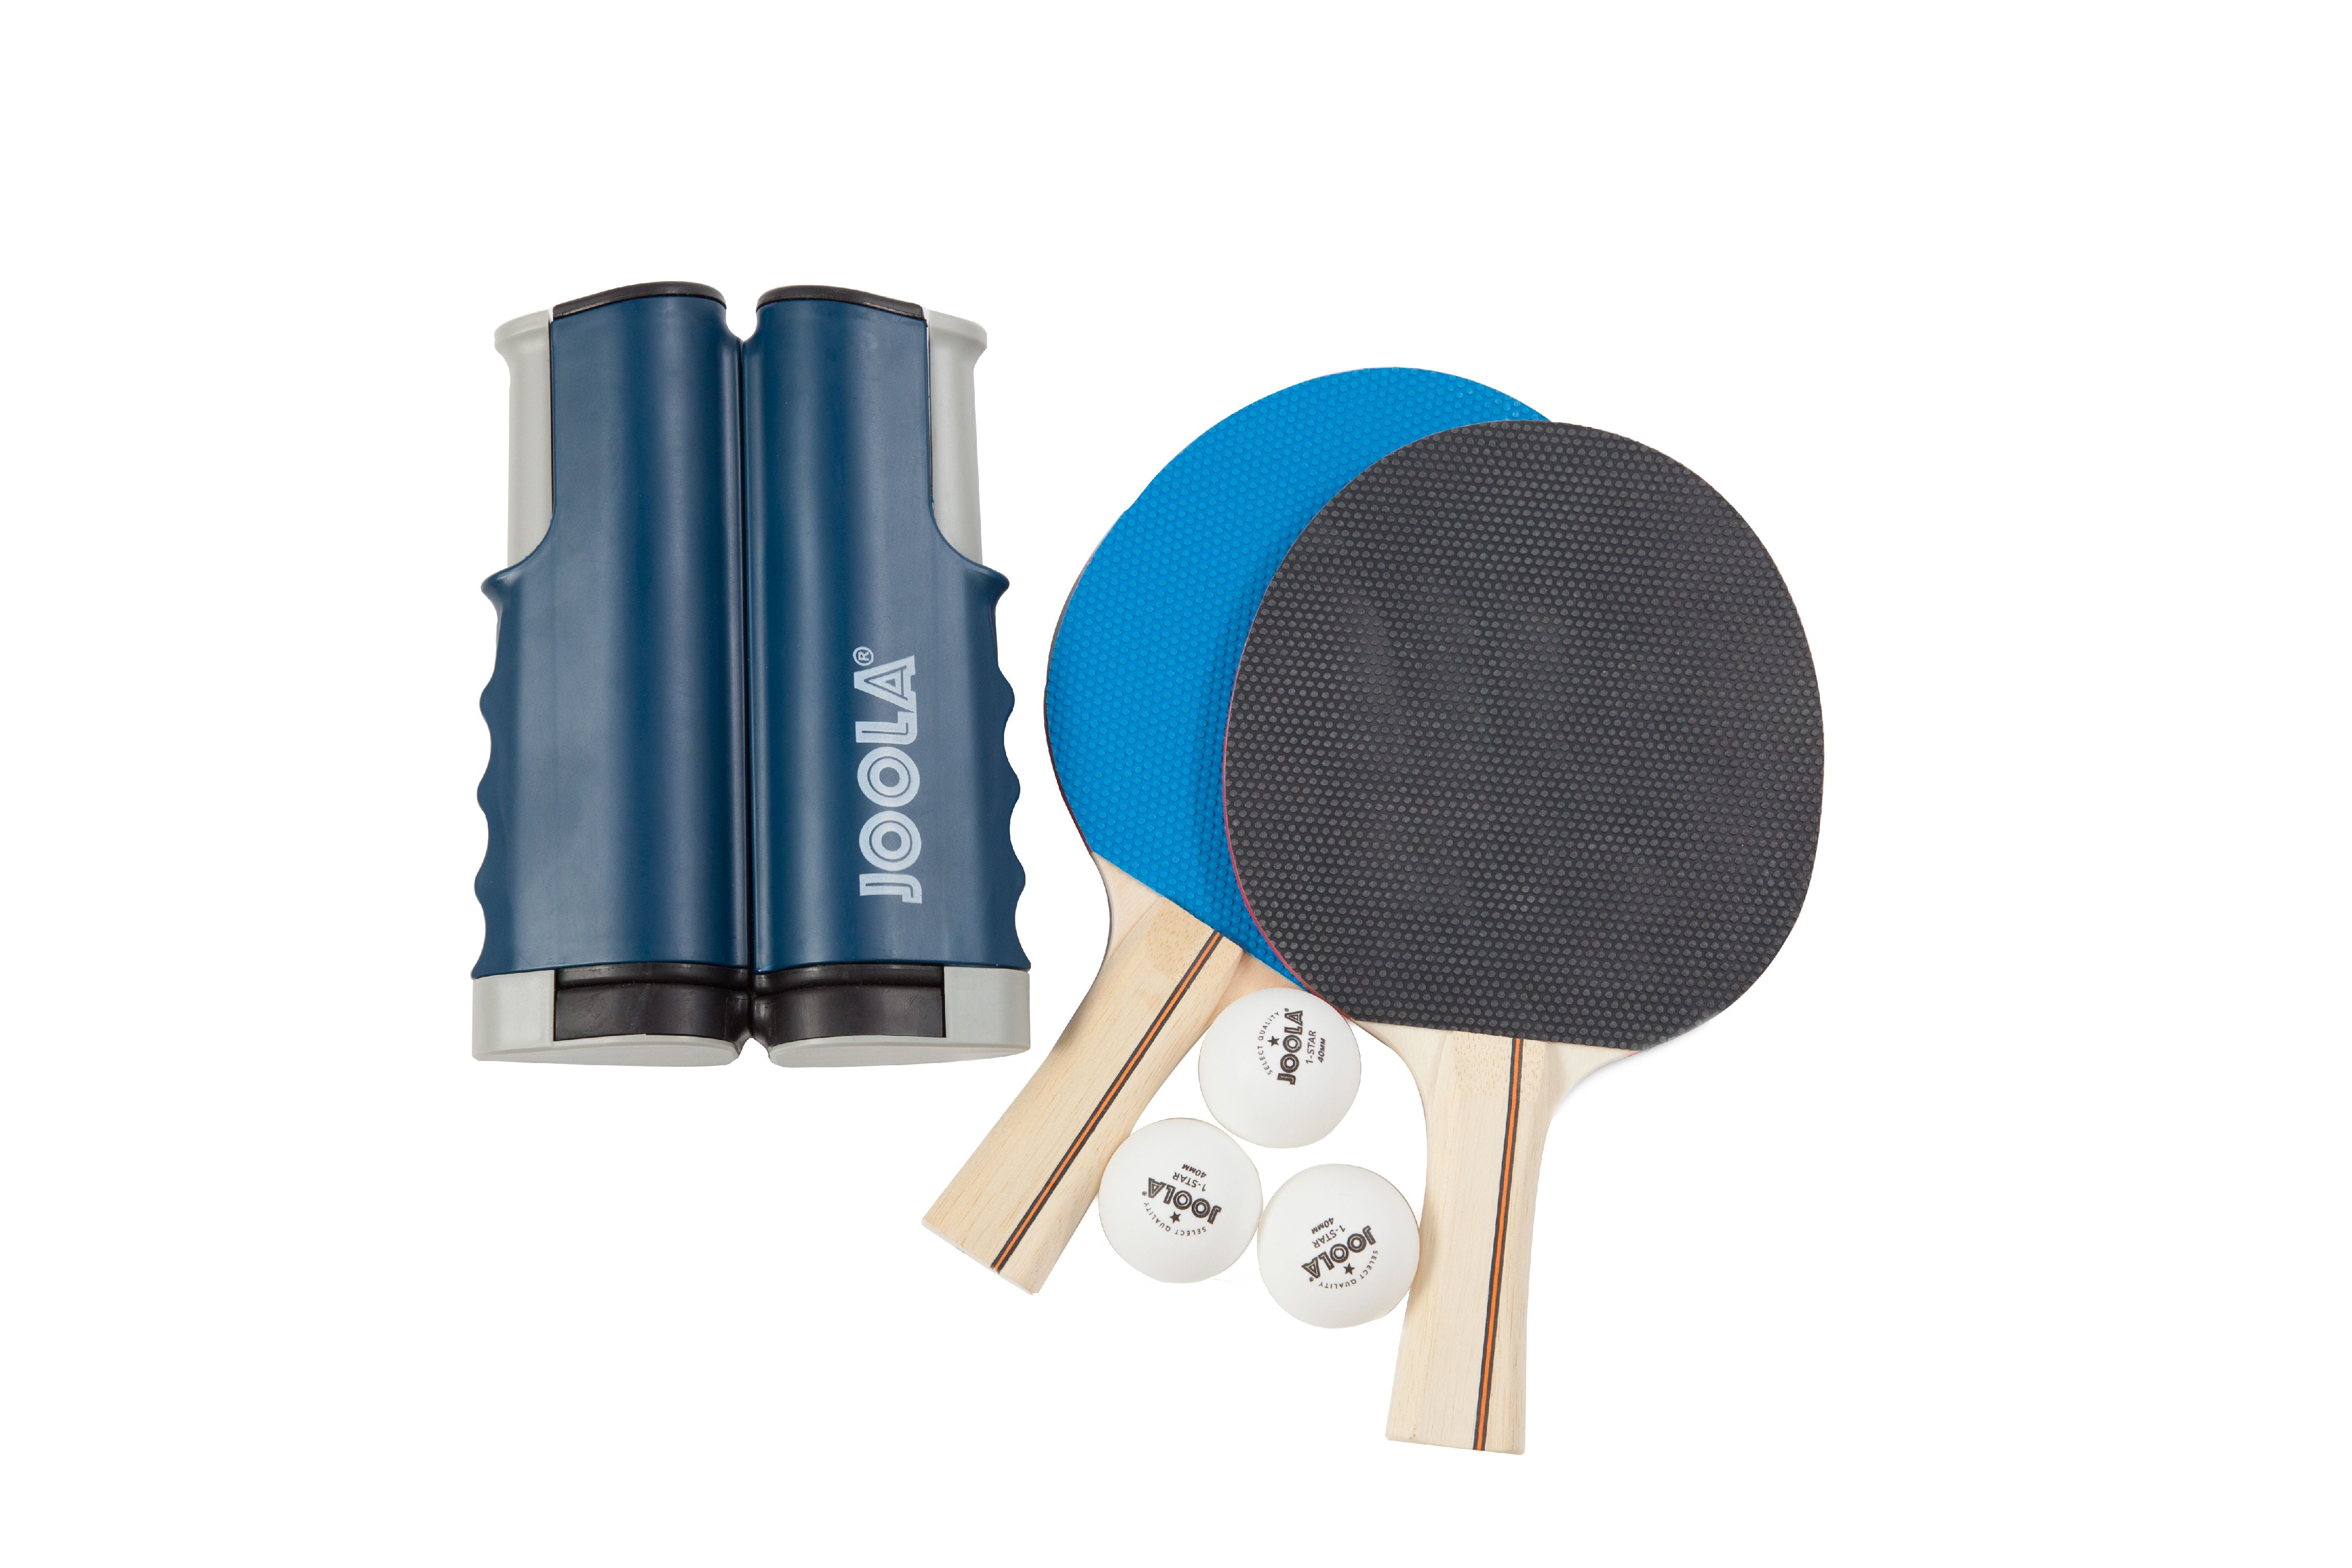 4 Professional Paddles Ping Pong Paddle Set with Retractable Table Tennis Net 